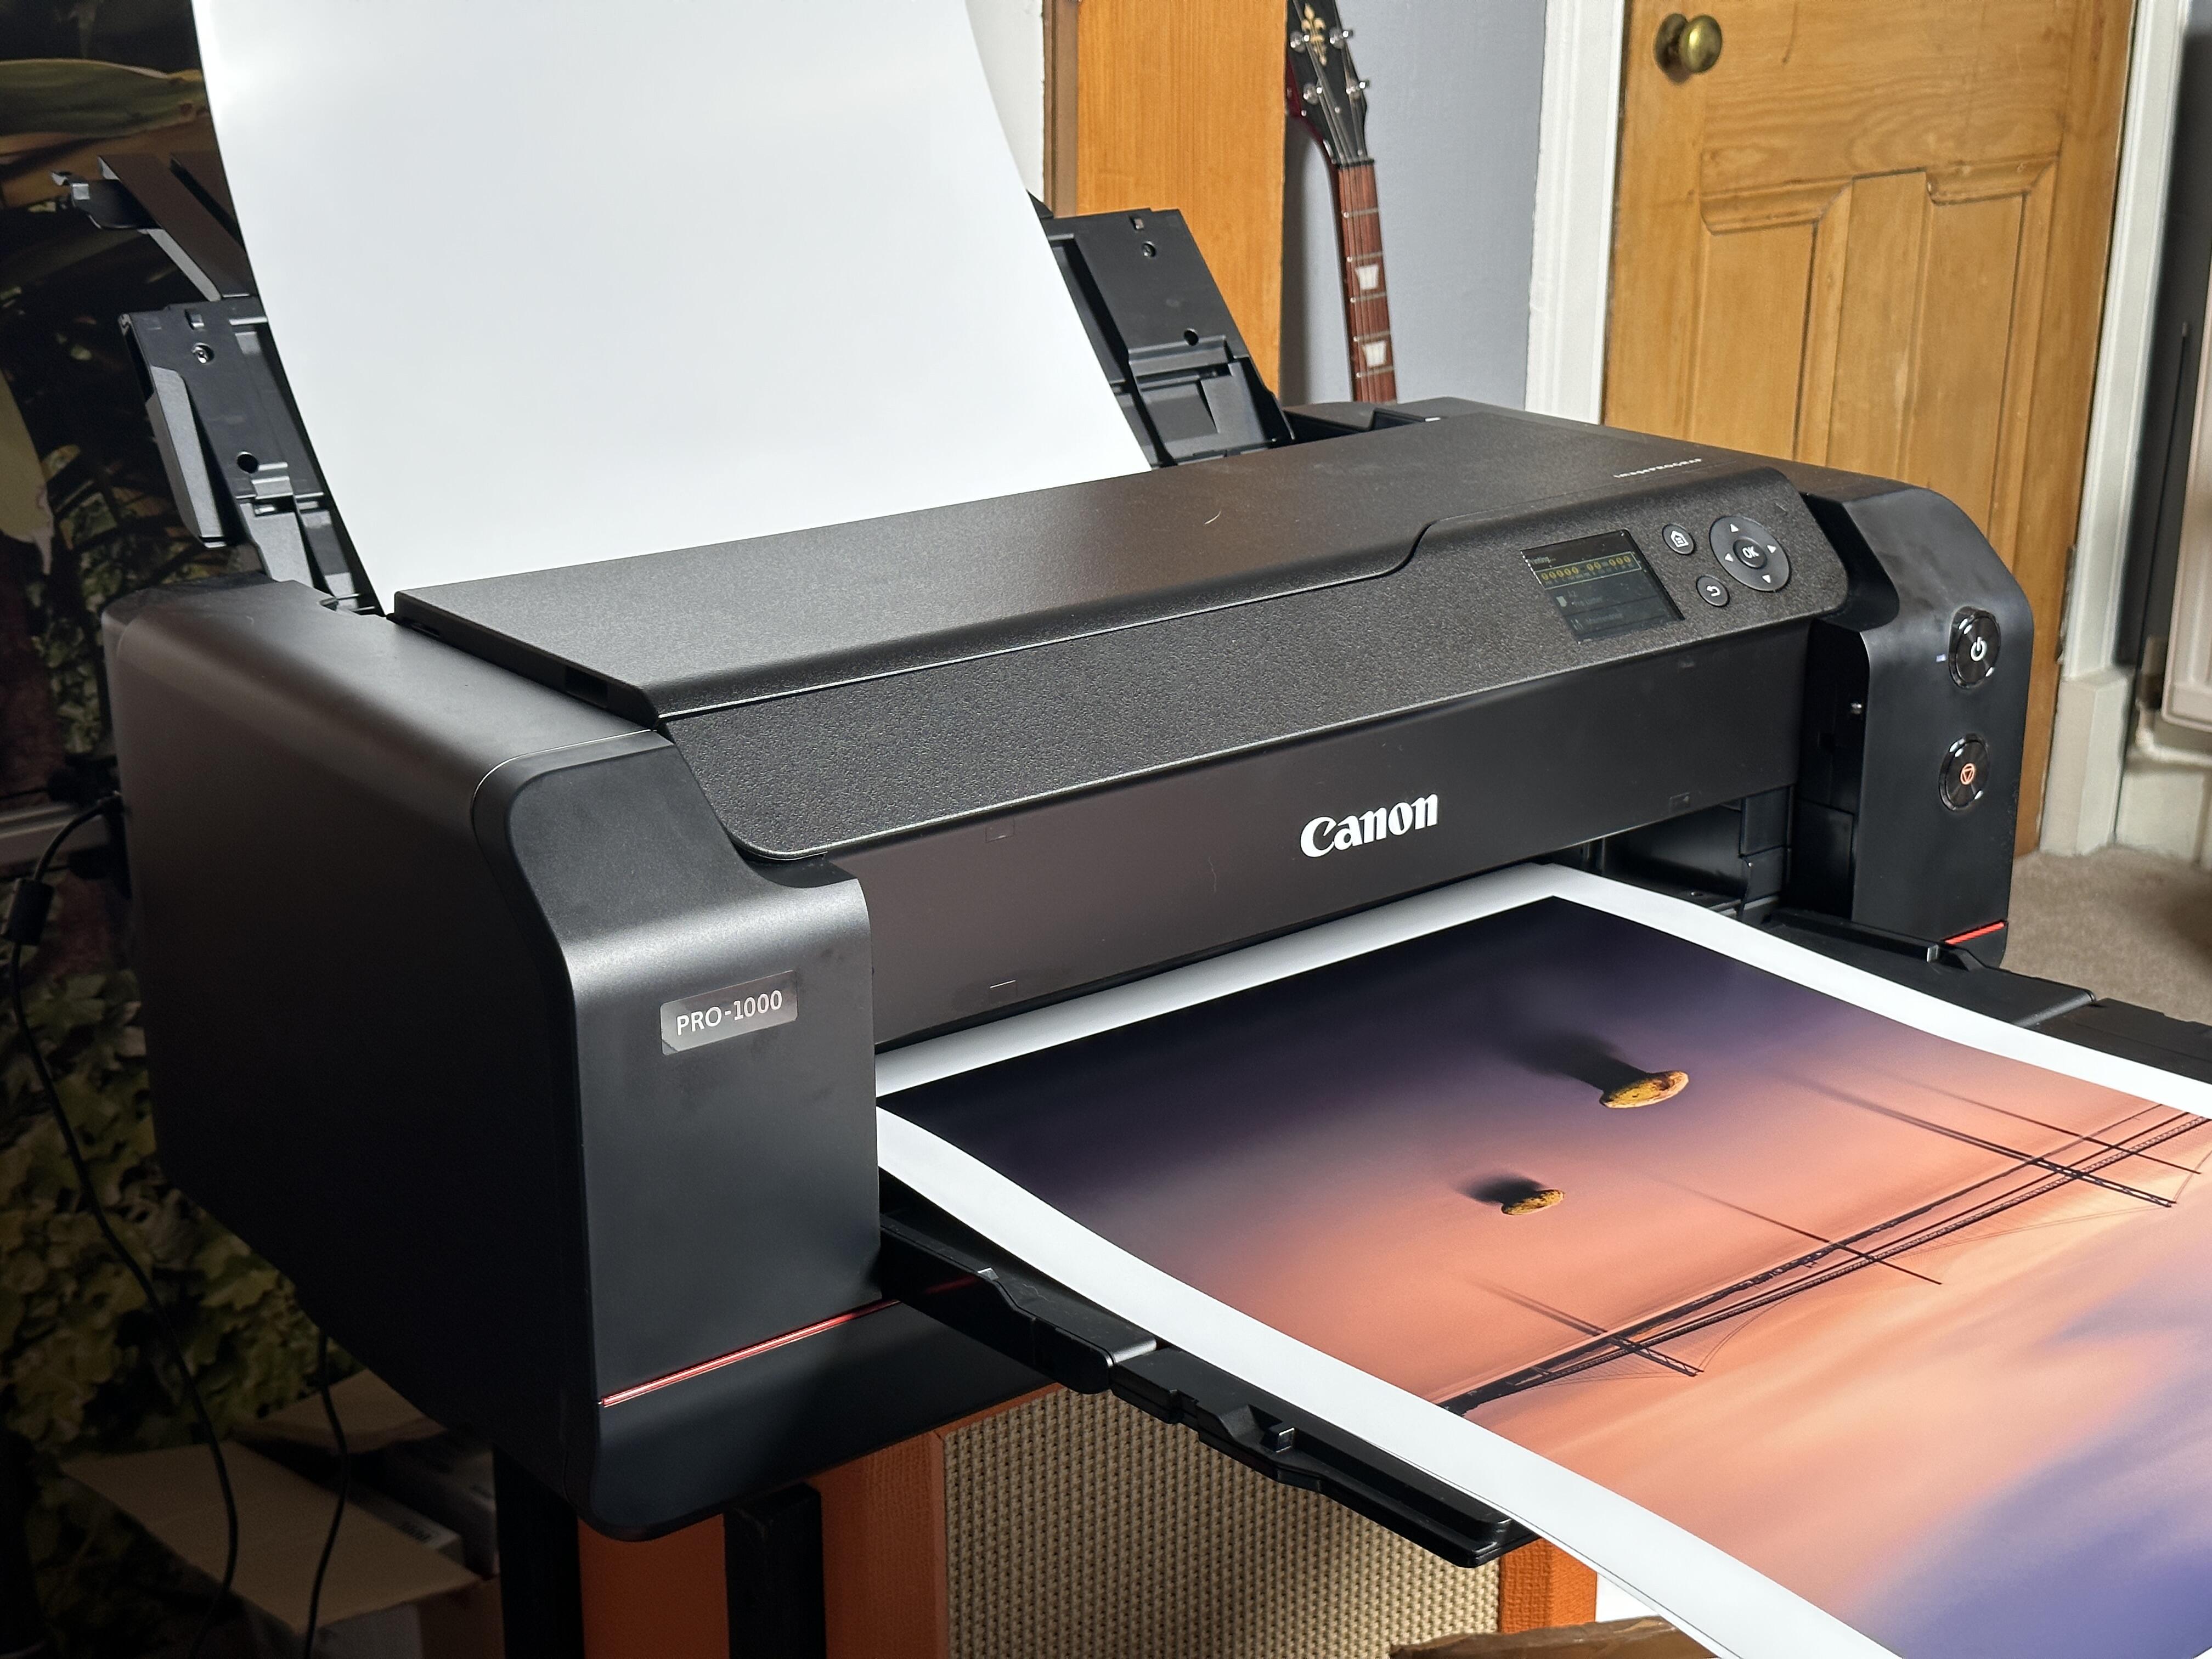 The Best Printers, According to the CNET Staff Who Use Them - CNET